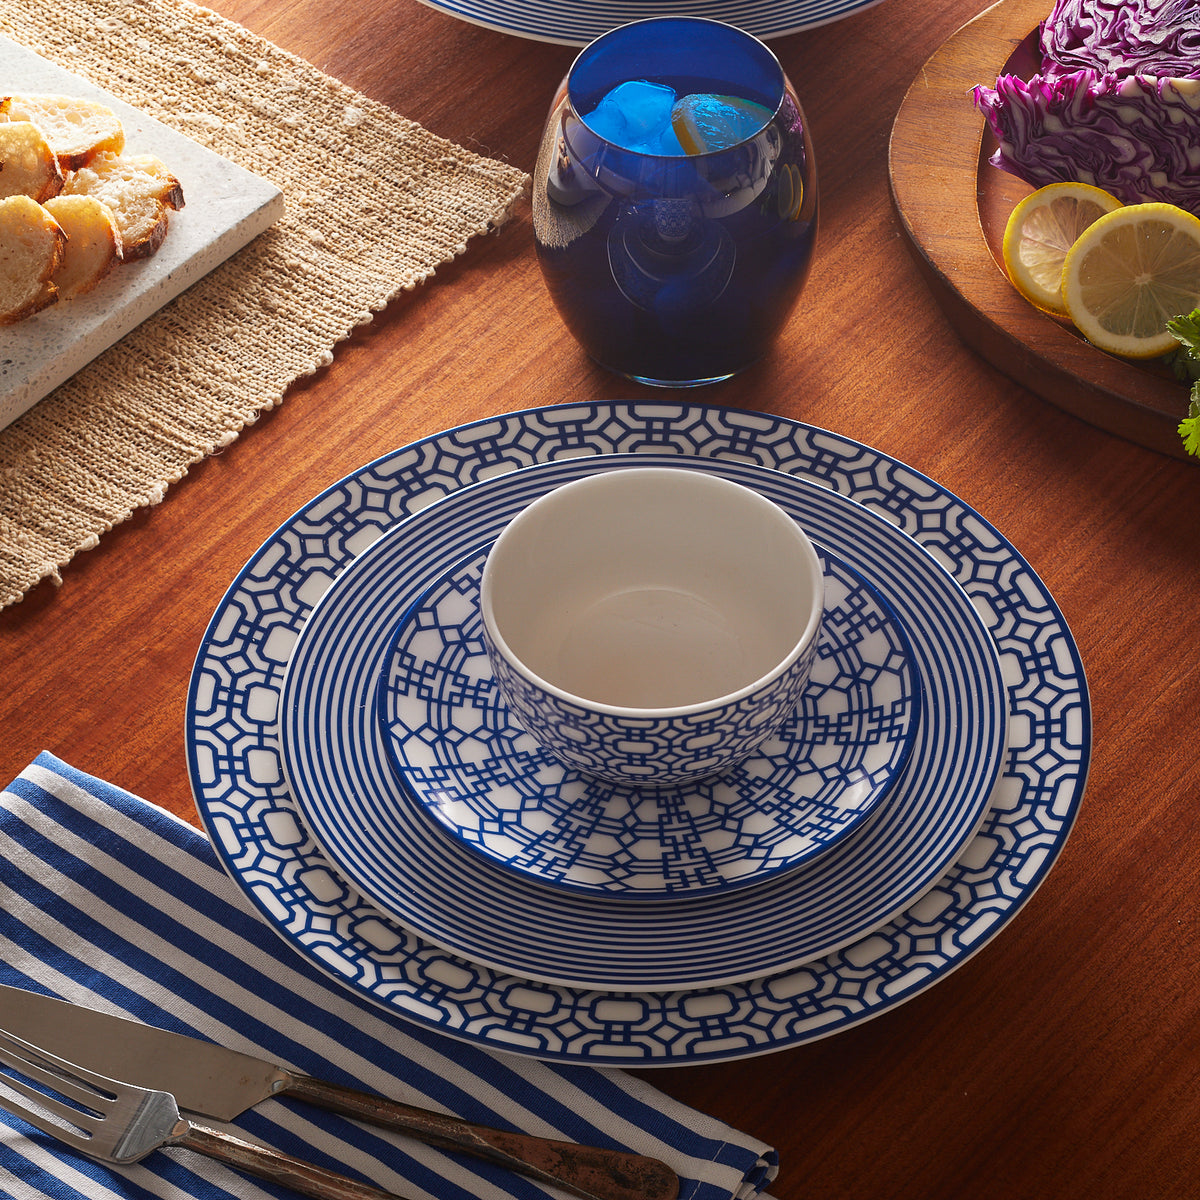 A dining table set with a blue and white patterned bowl, plate, and Newport Small Plates featuring an interlocking lattice pattern, a blue glass with a beverage, bread slices on a cutting board, a striped napkin, knife, and fork. The premium porcelain evokes the charm of Newport Garden Gate from Caskata Artisanal Home.